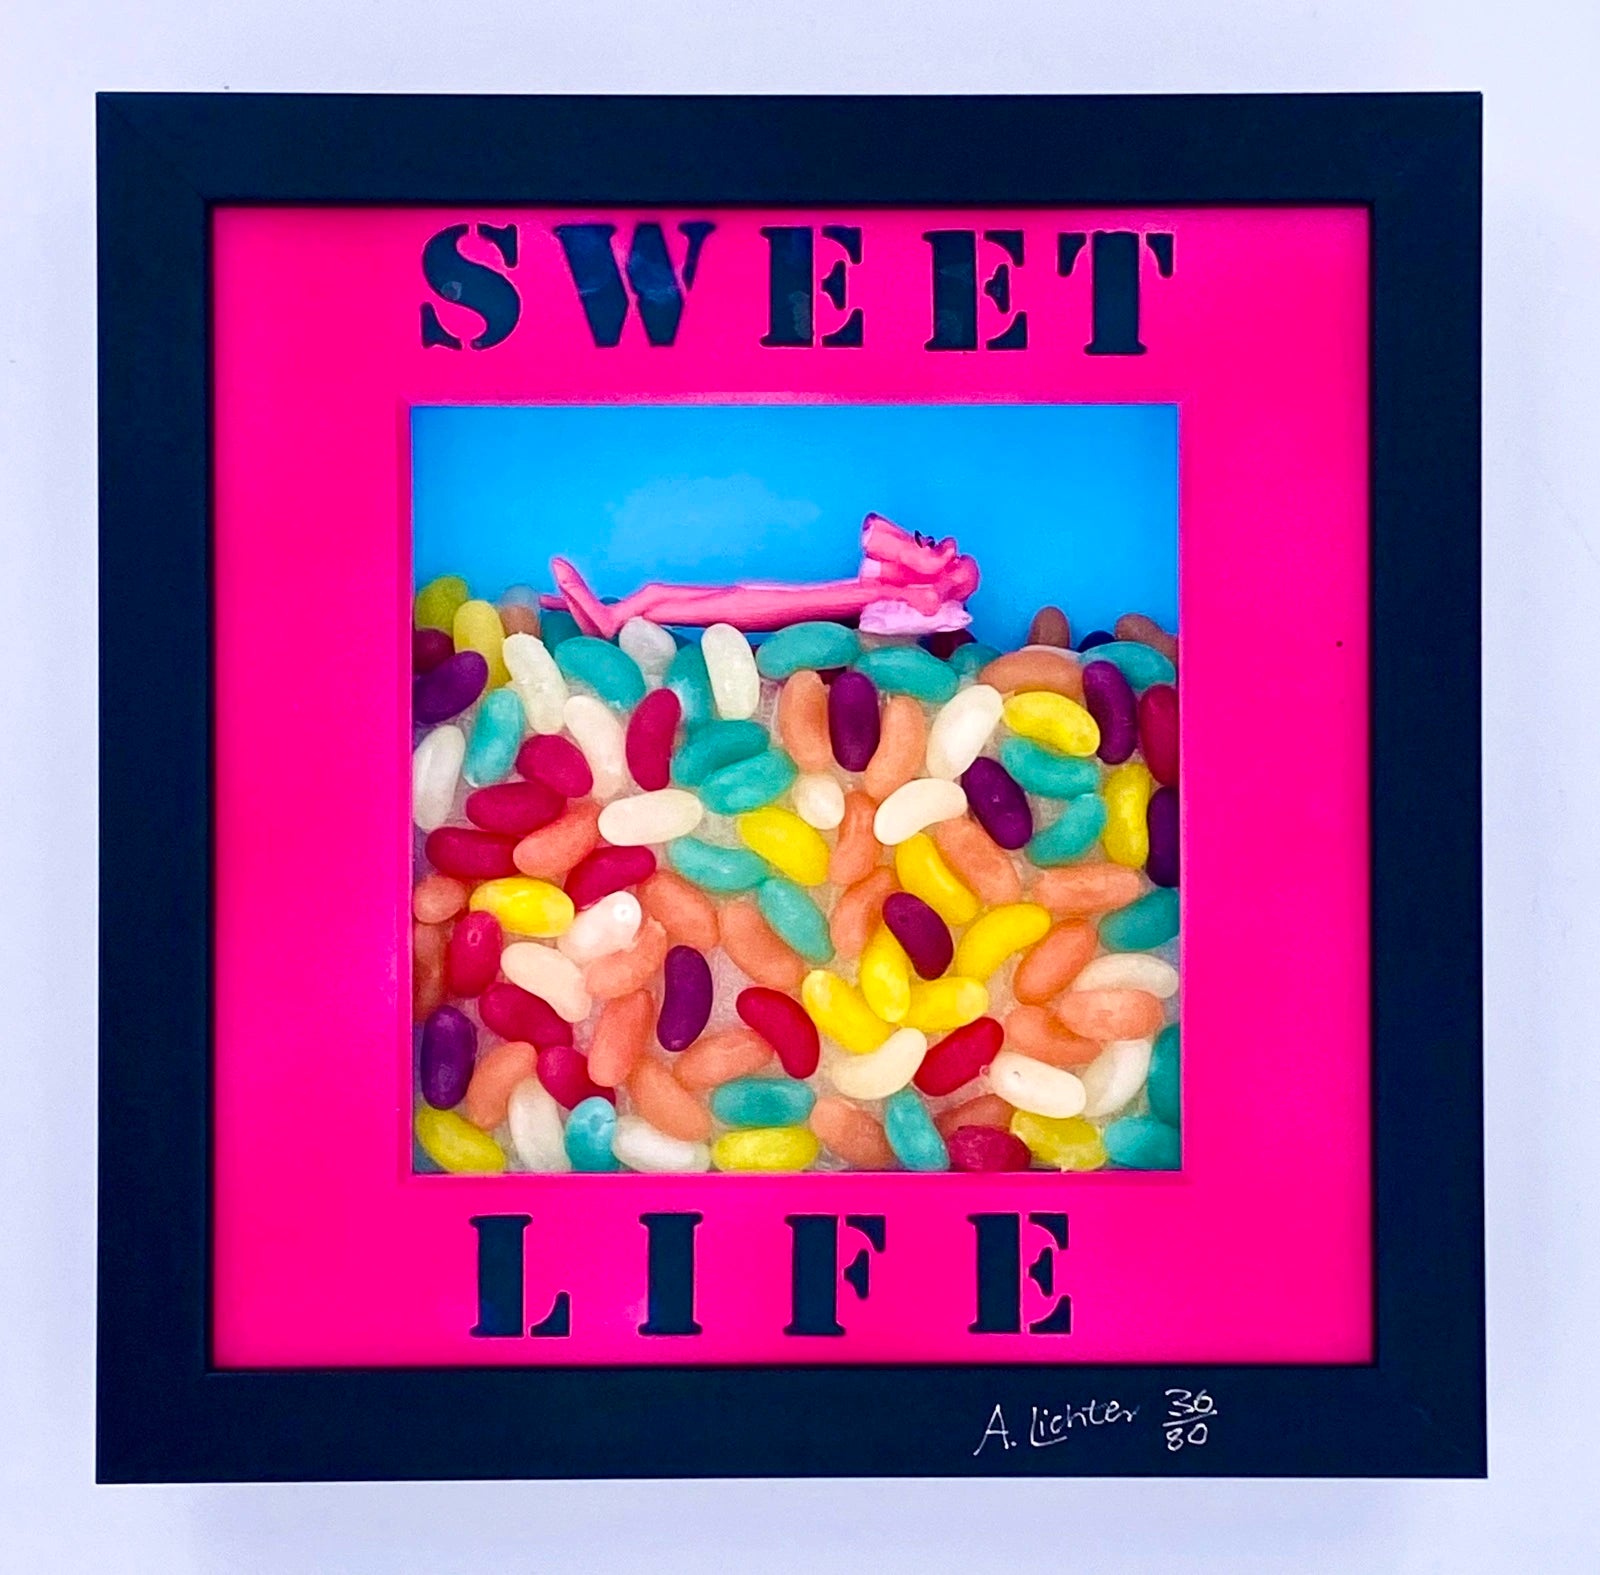 Andreas Lichter - Sweet Life  Pink Paulchen Panther - Galerie Vogel